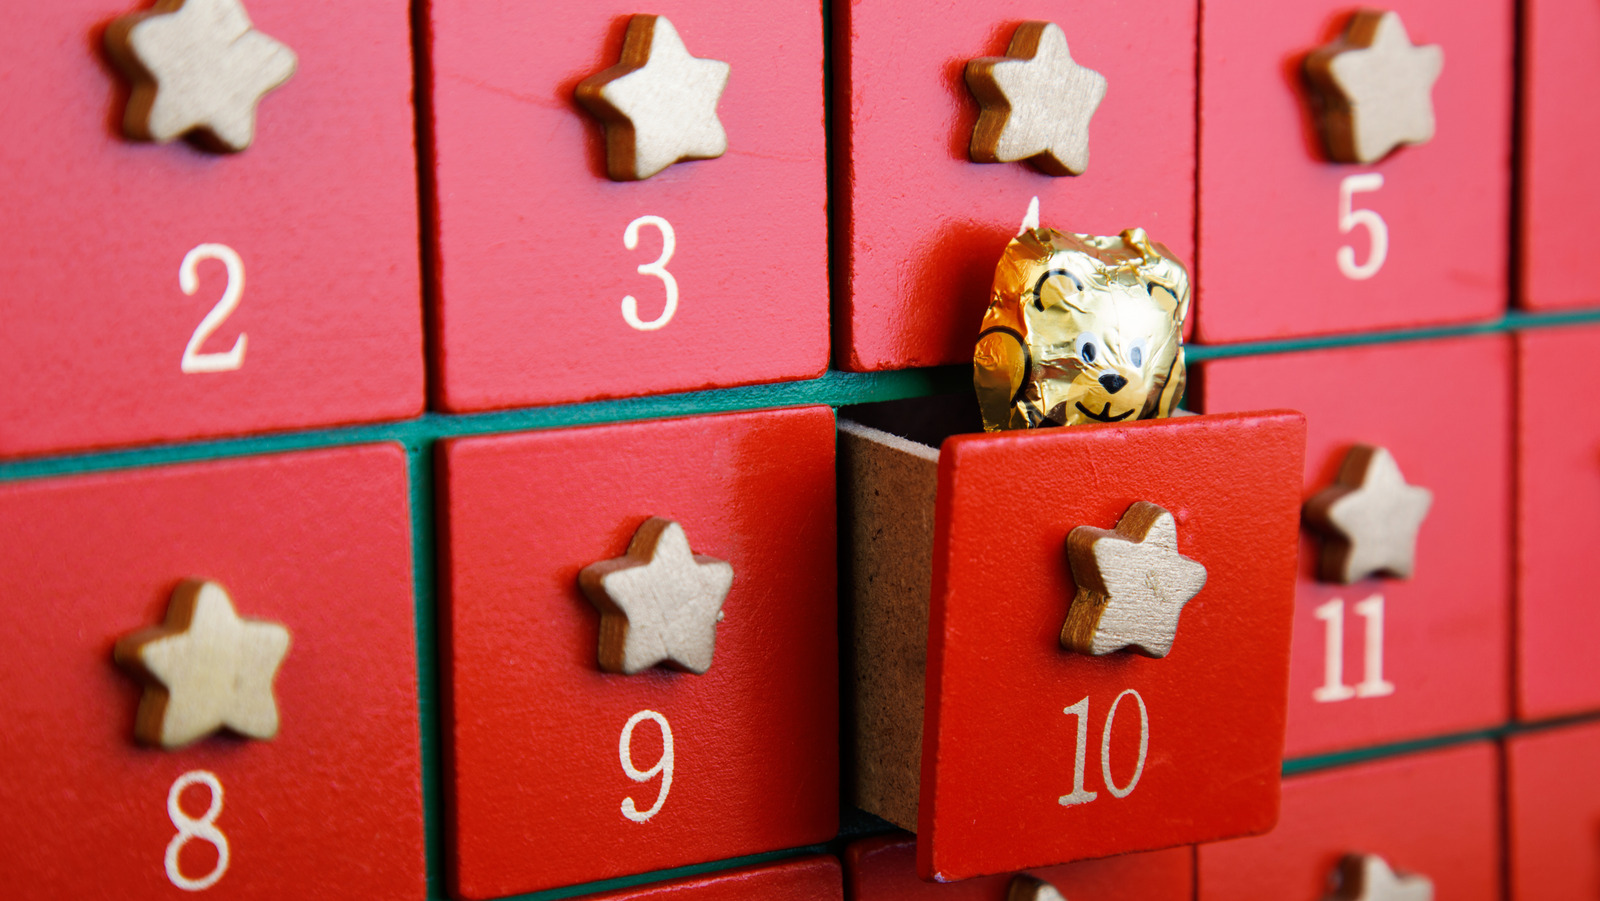 The eight most extravagant advent calendars of 2021